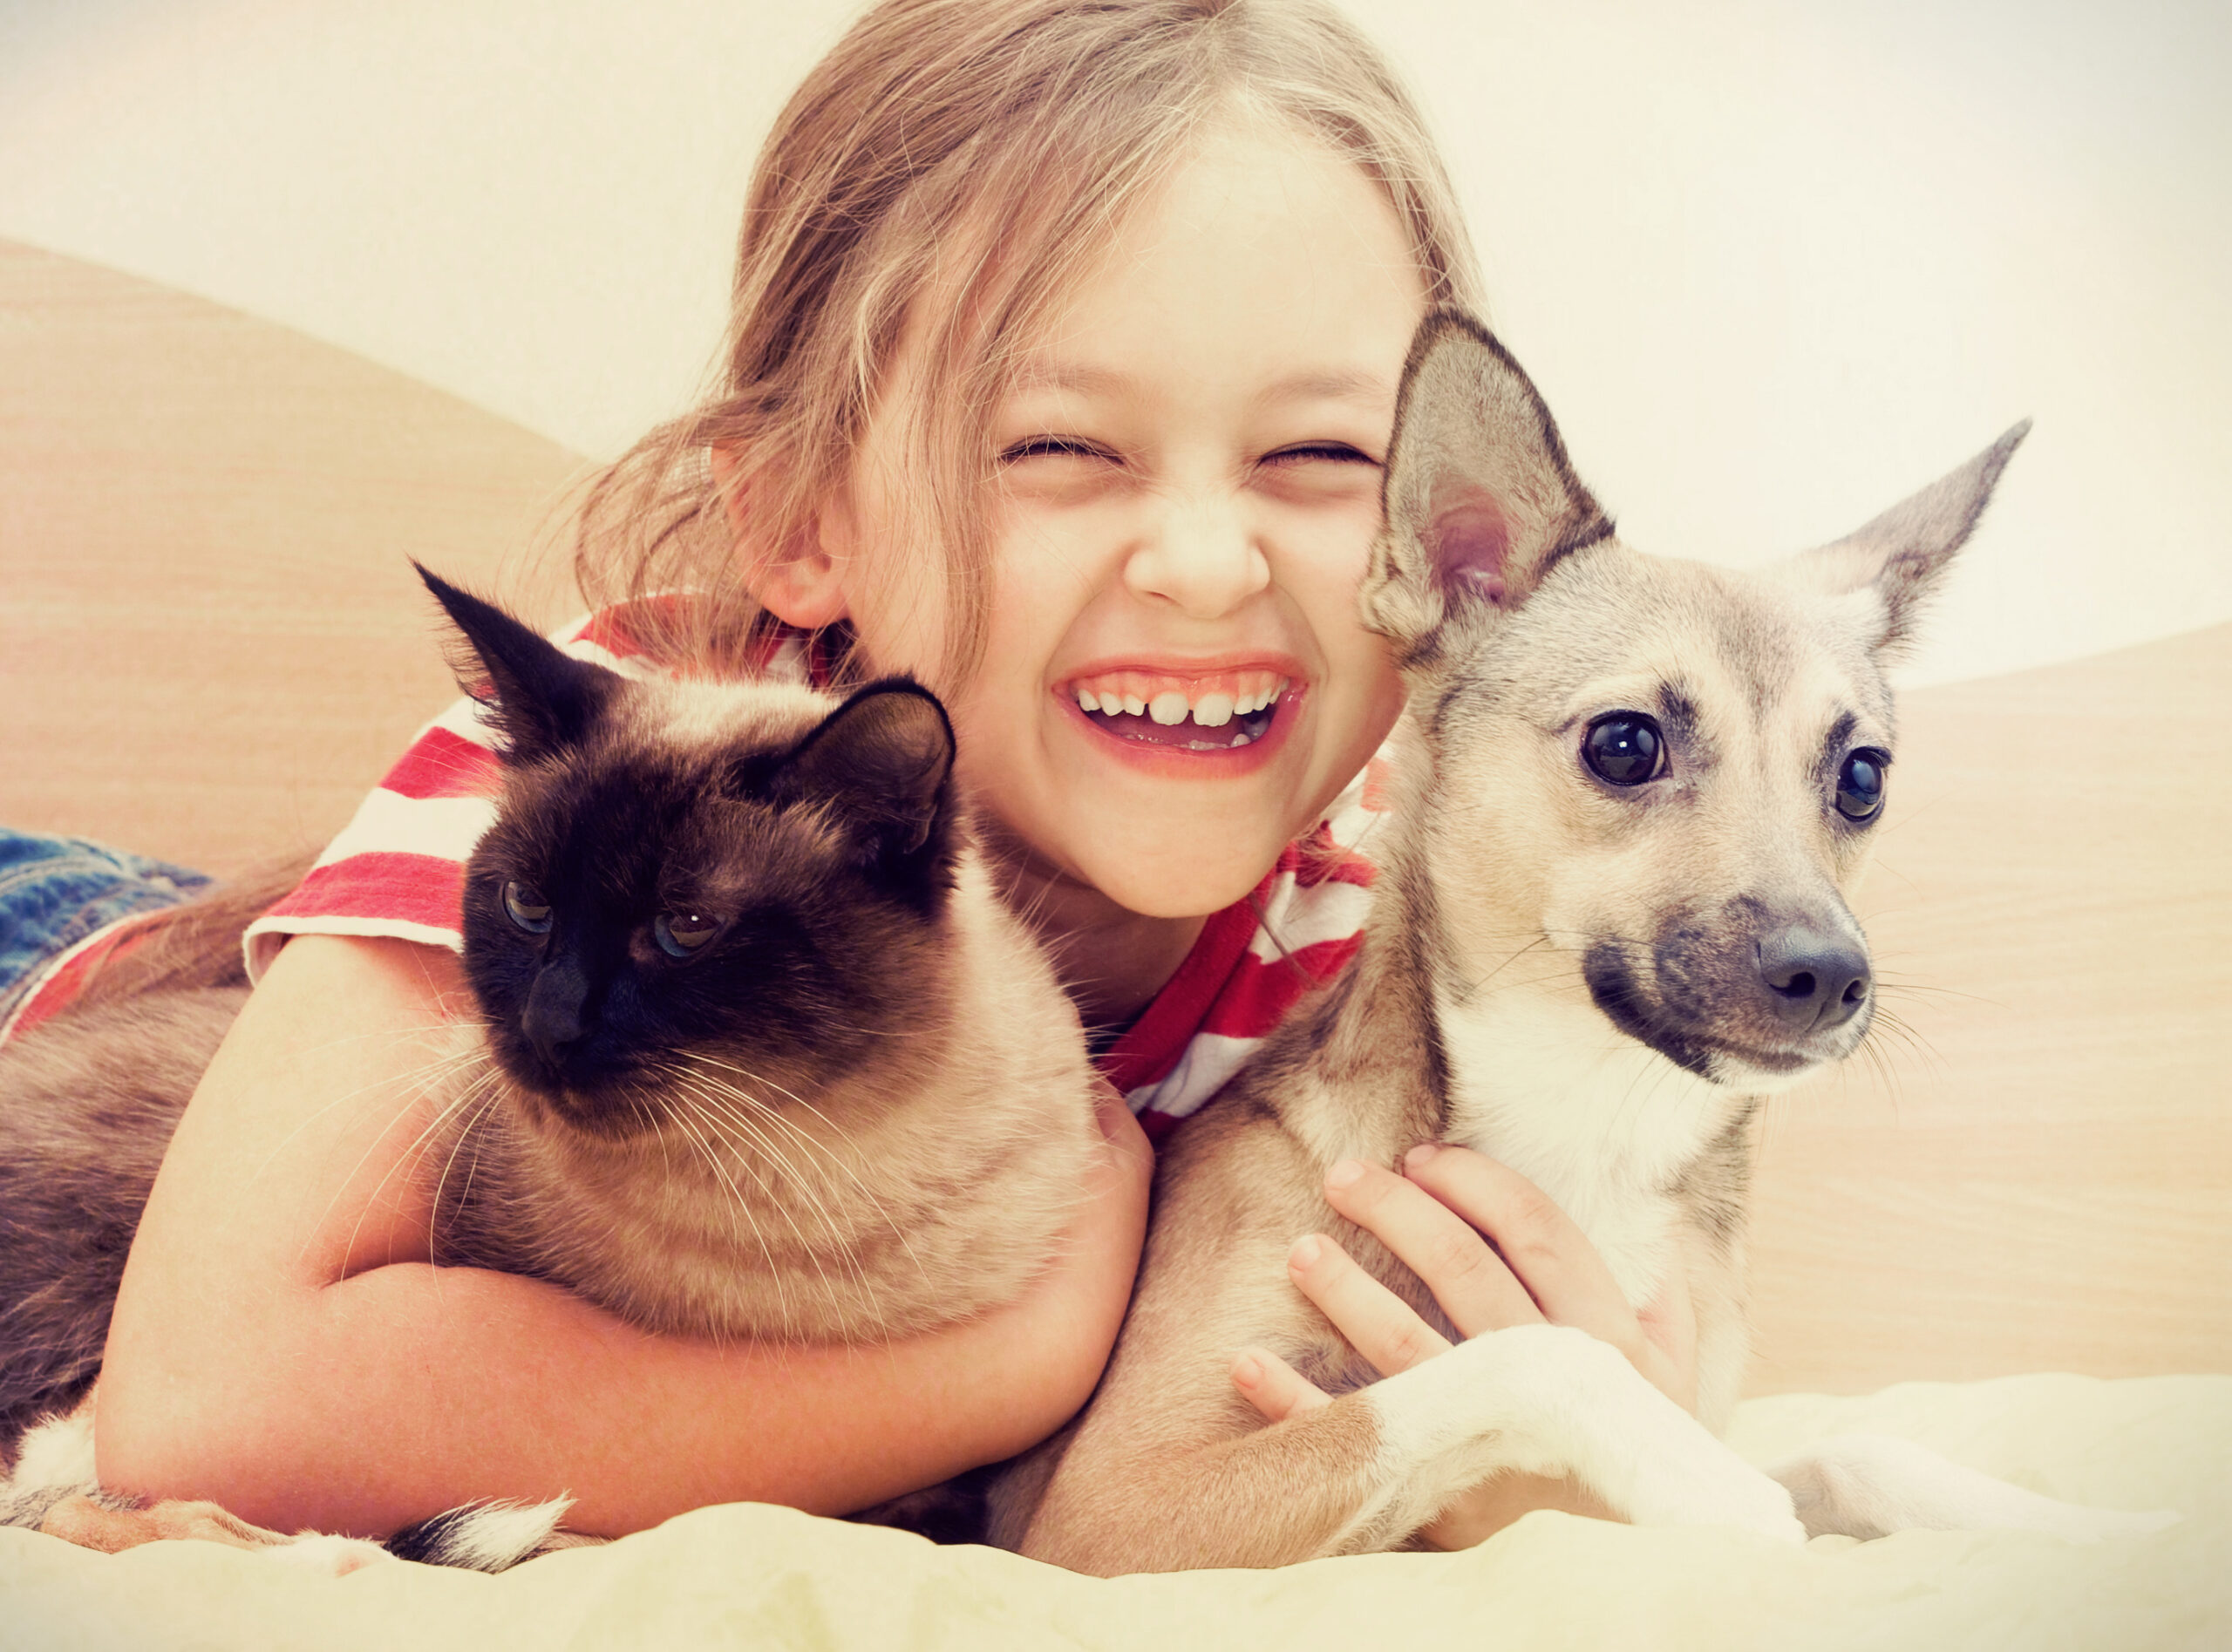 child-hugging-a-cat-and-dog-2